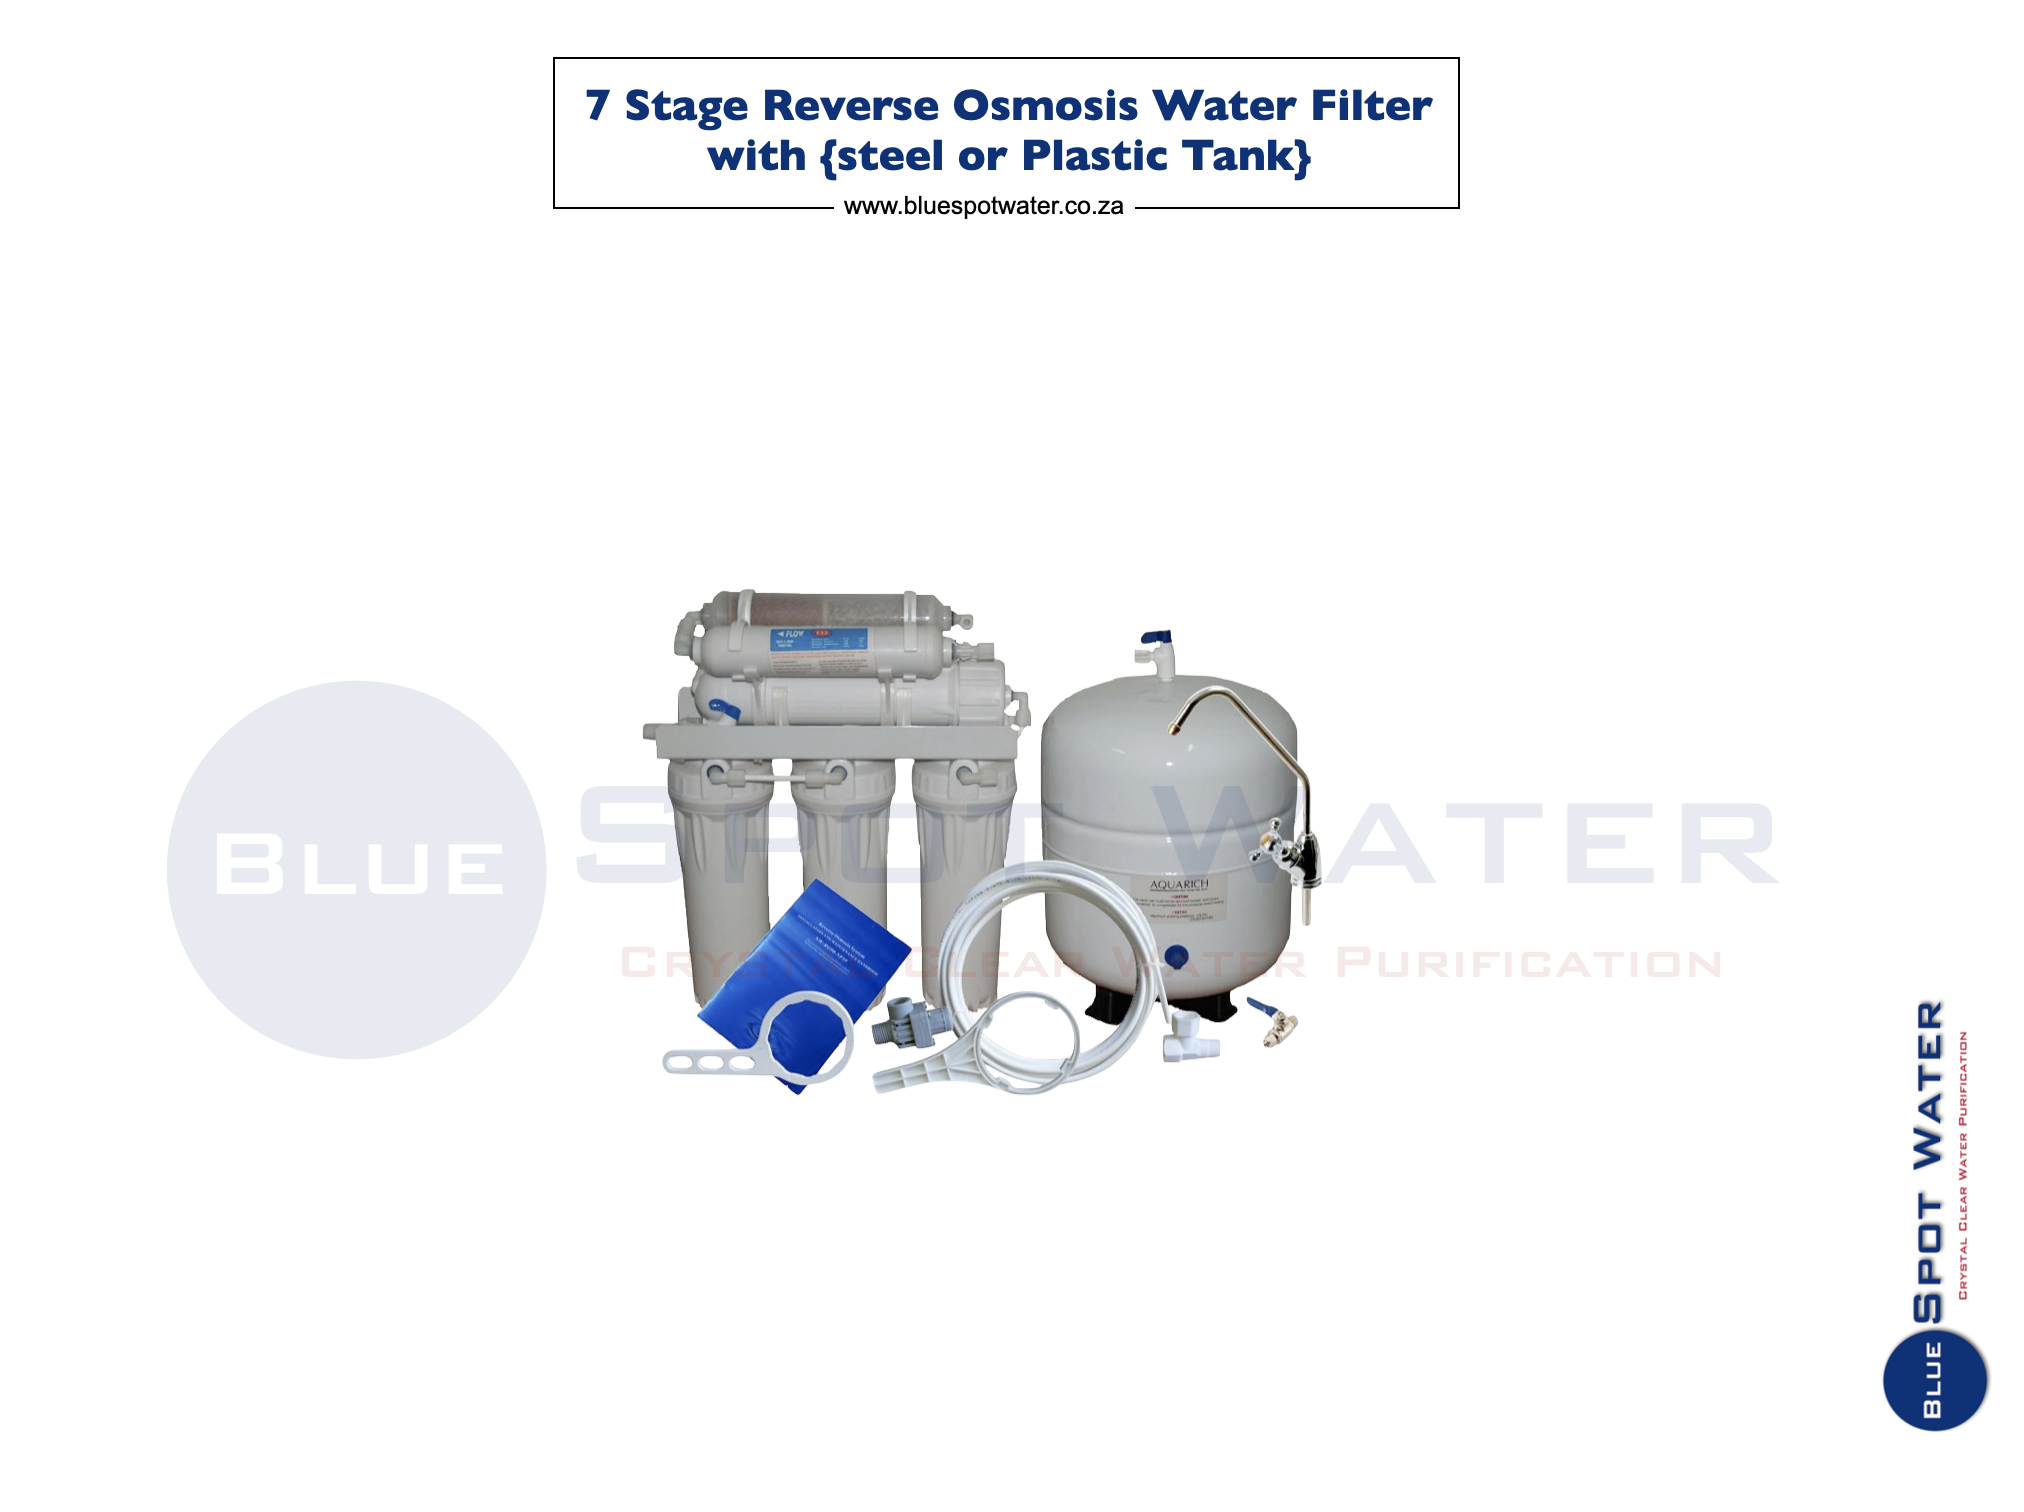 7-stage-reverse-osmosis-water-filter-with-steel-or-plastic-tank